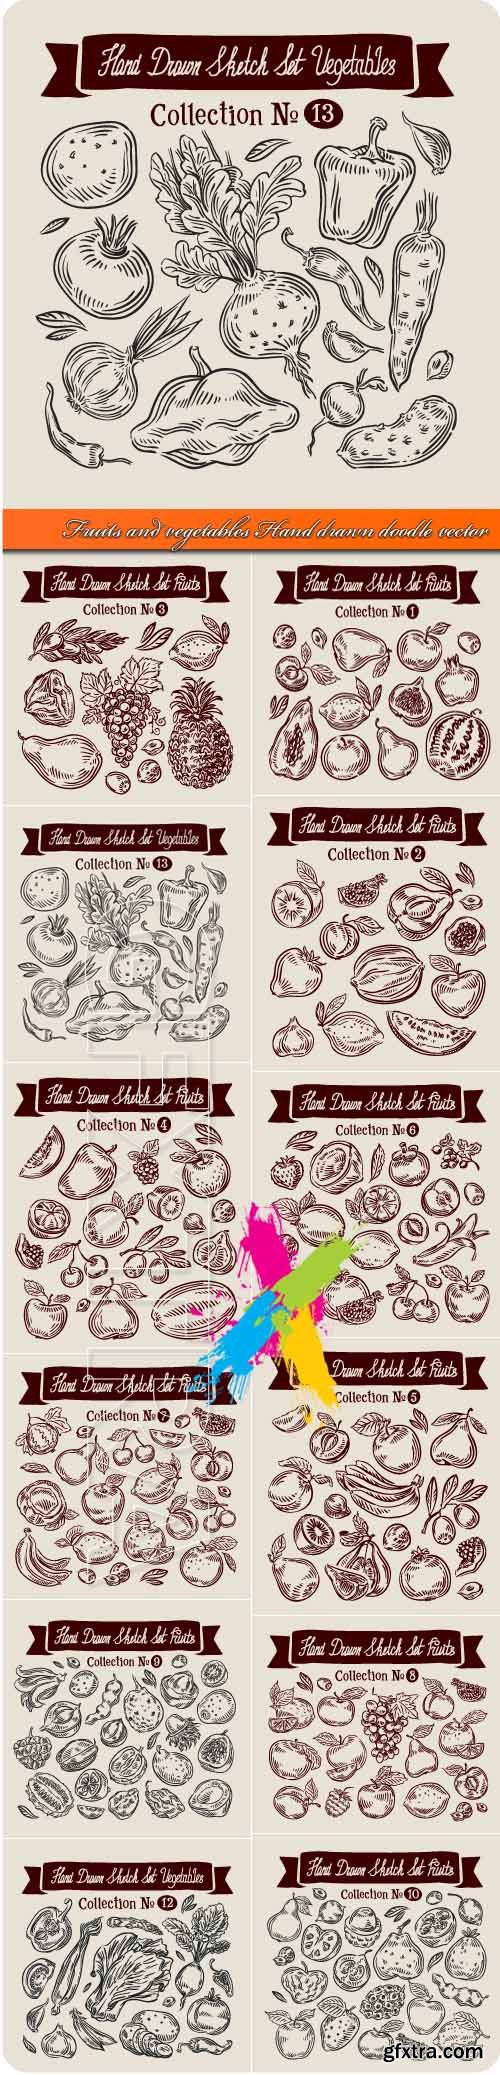 Fruits and vegetables Hand drawn doodle vector